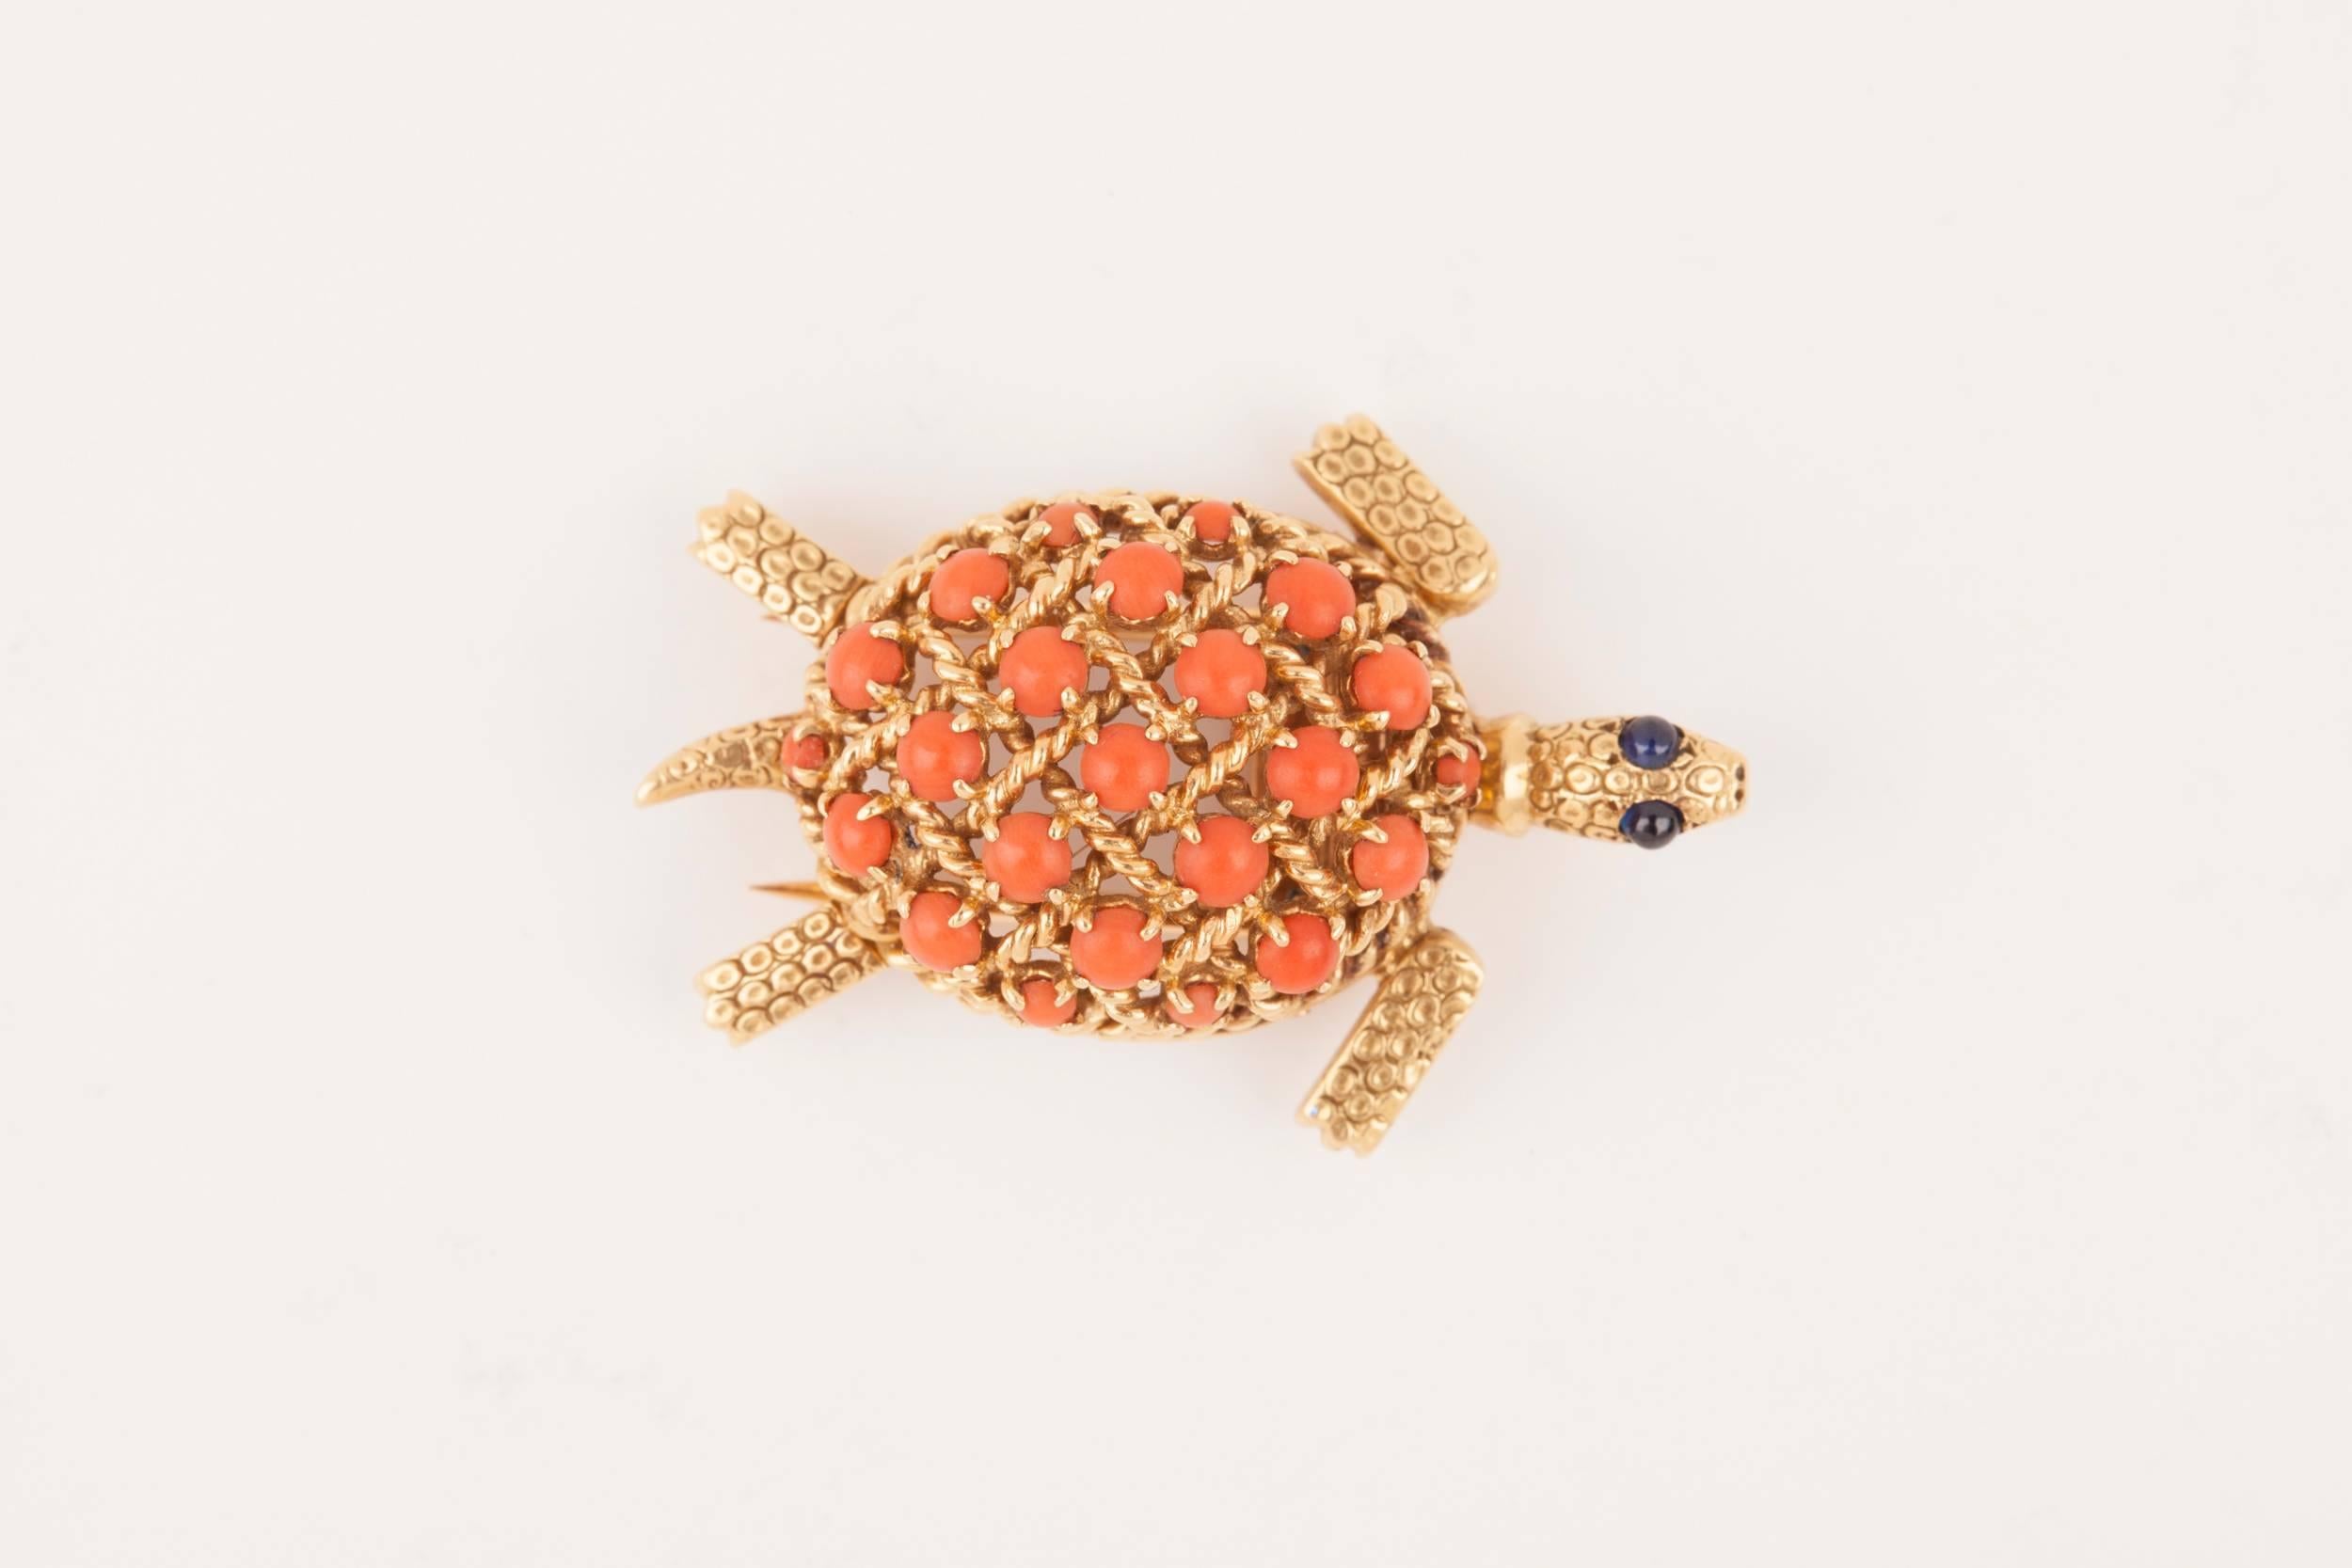 Beautiful Cartier Turtle brooch. Made in france circa 1960.
Gold 18K and Coral cabochons.
Signed and numbers.
Weight: 12.70 grams
Dimensions: 3.70 * 2.5 cm
In perfect condition 